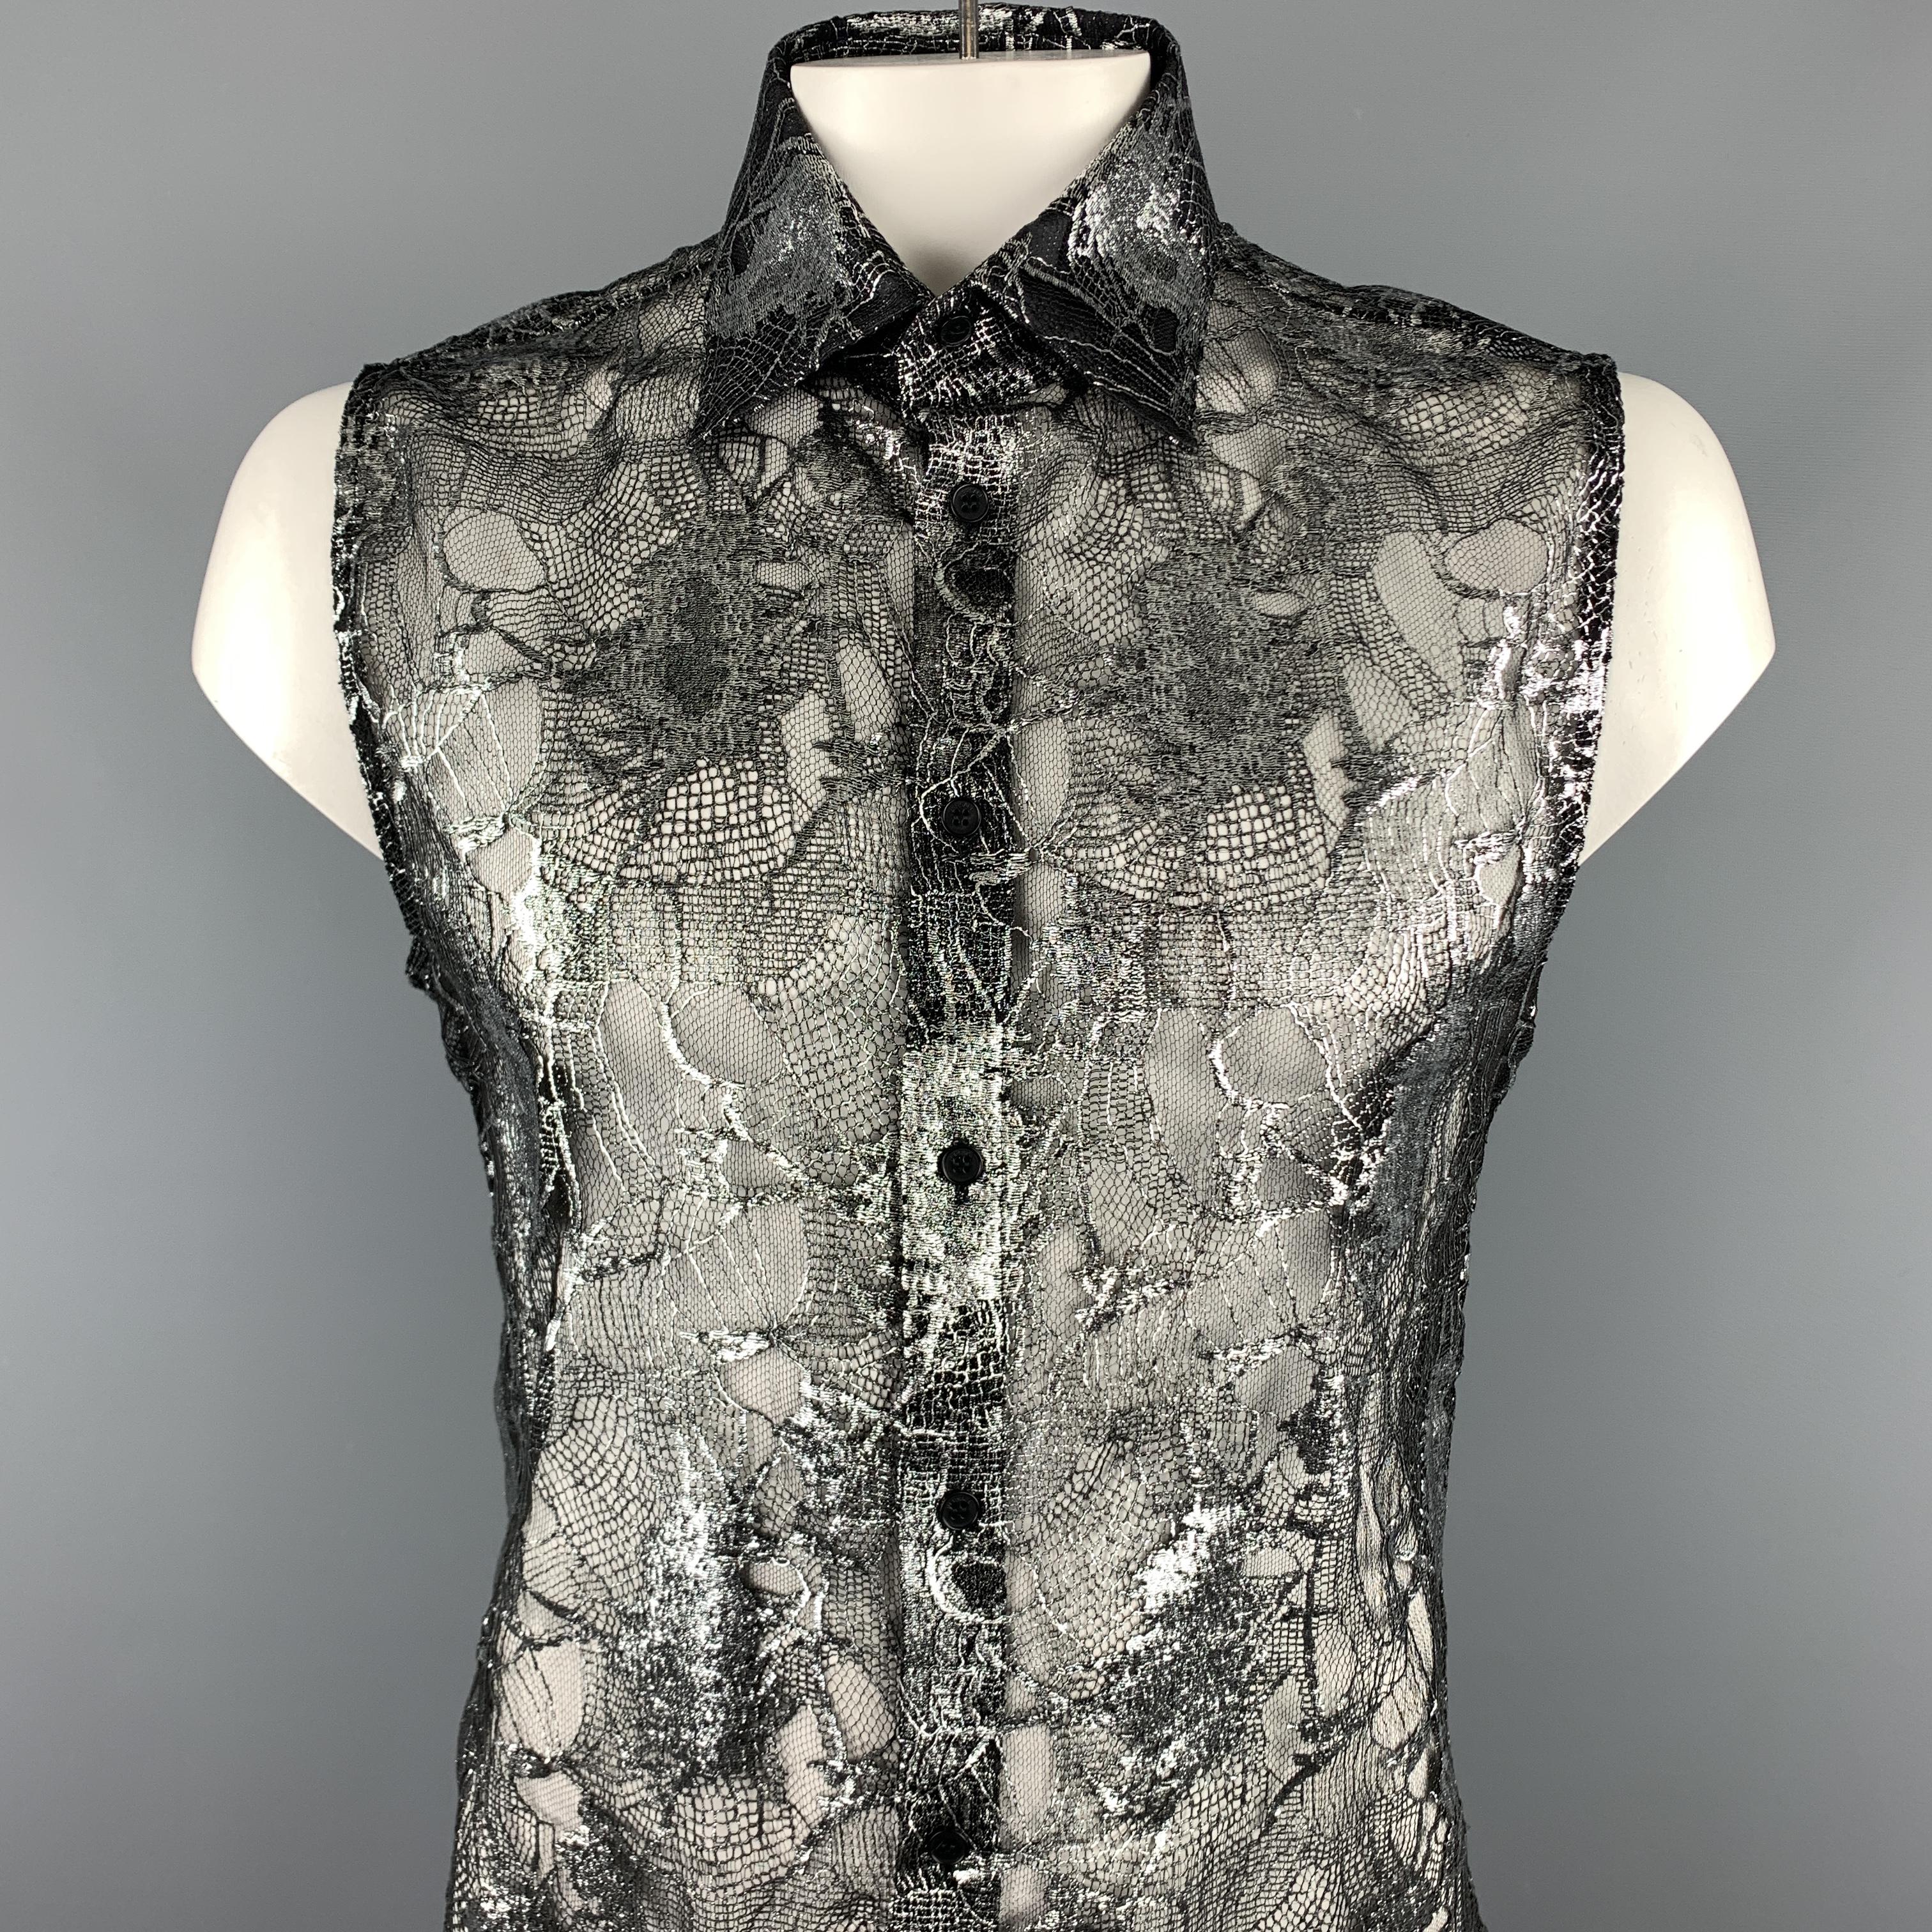 Vintage GIANNI VERSACE sleeveless shirt comes in a black & silver lace silk blend featuring a button up style and a spread collar. Made in Italy.

Excellent Pre-Owned Condition.
Marked: IT 56

Measurements:

Shoulder: 17 in. 
Chest: 44 in. 
Length: